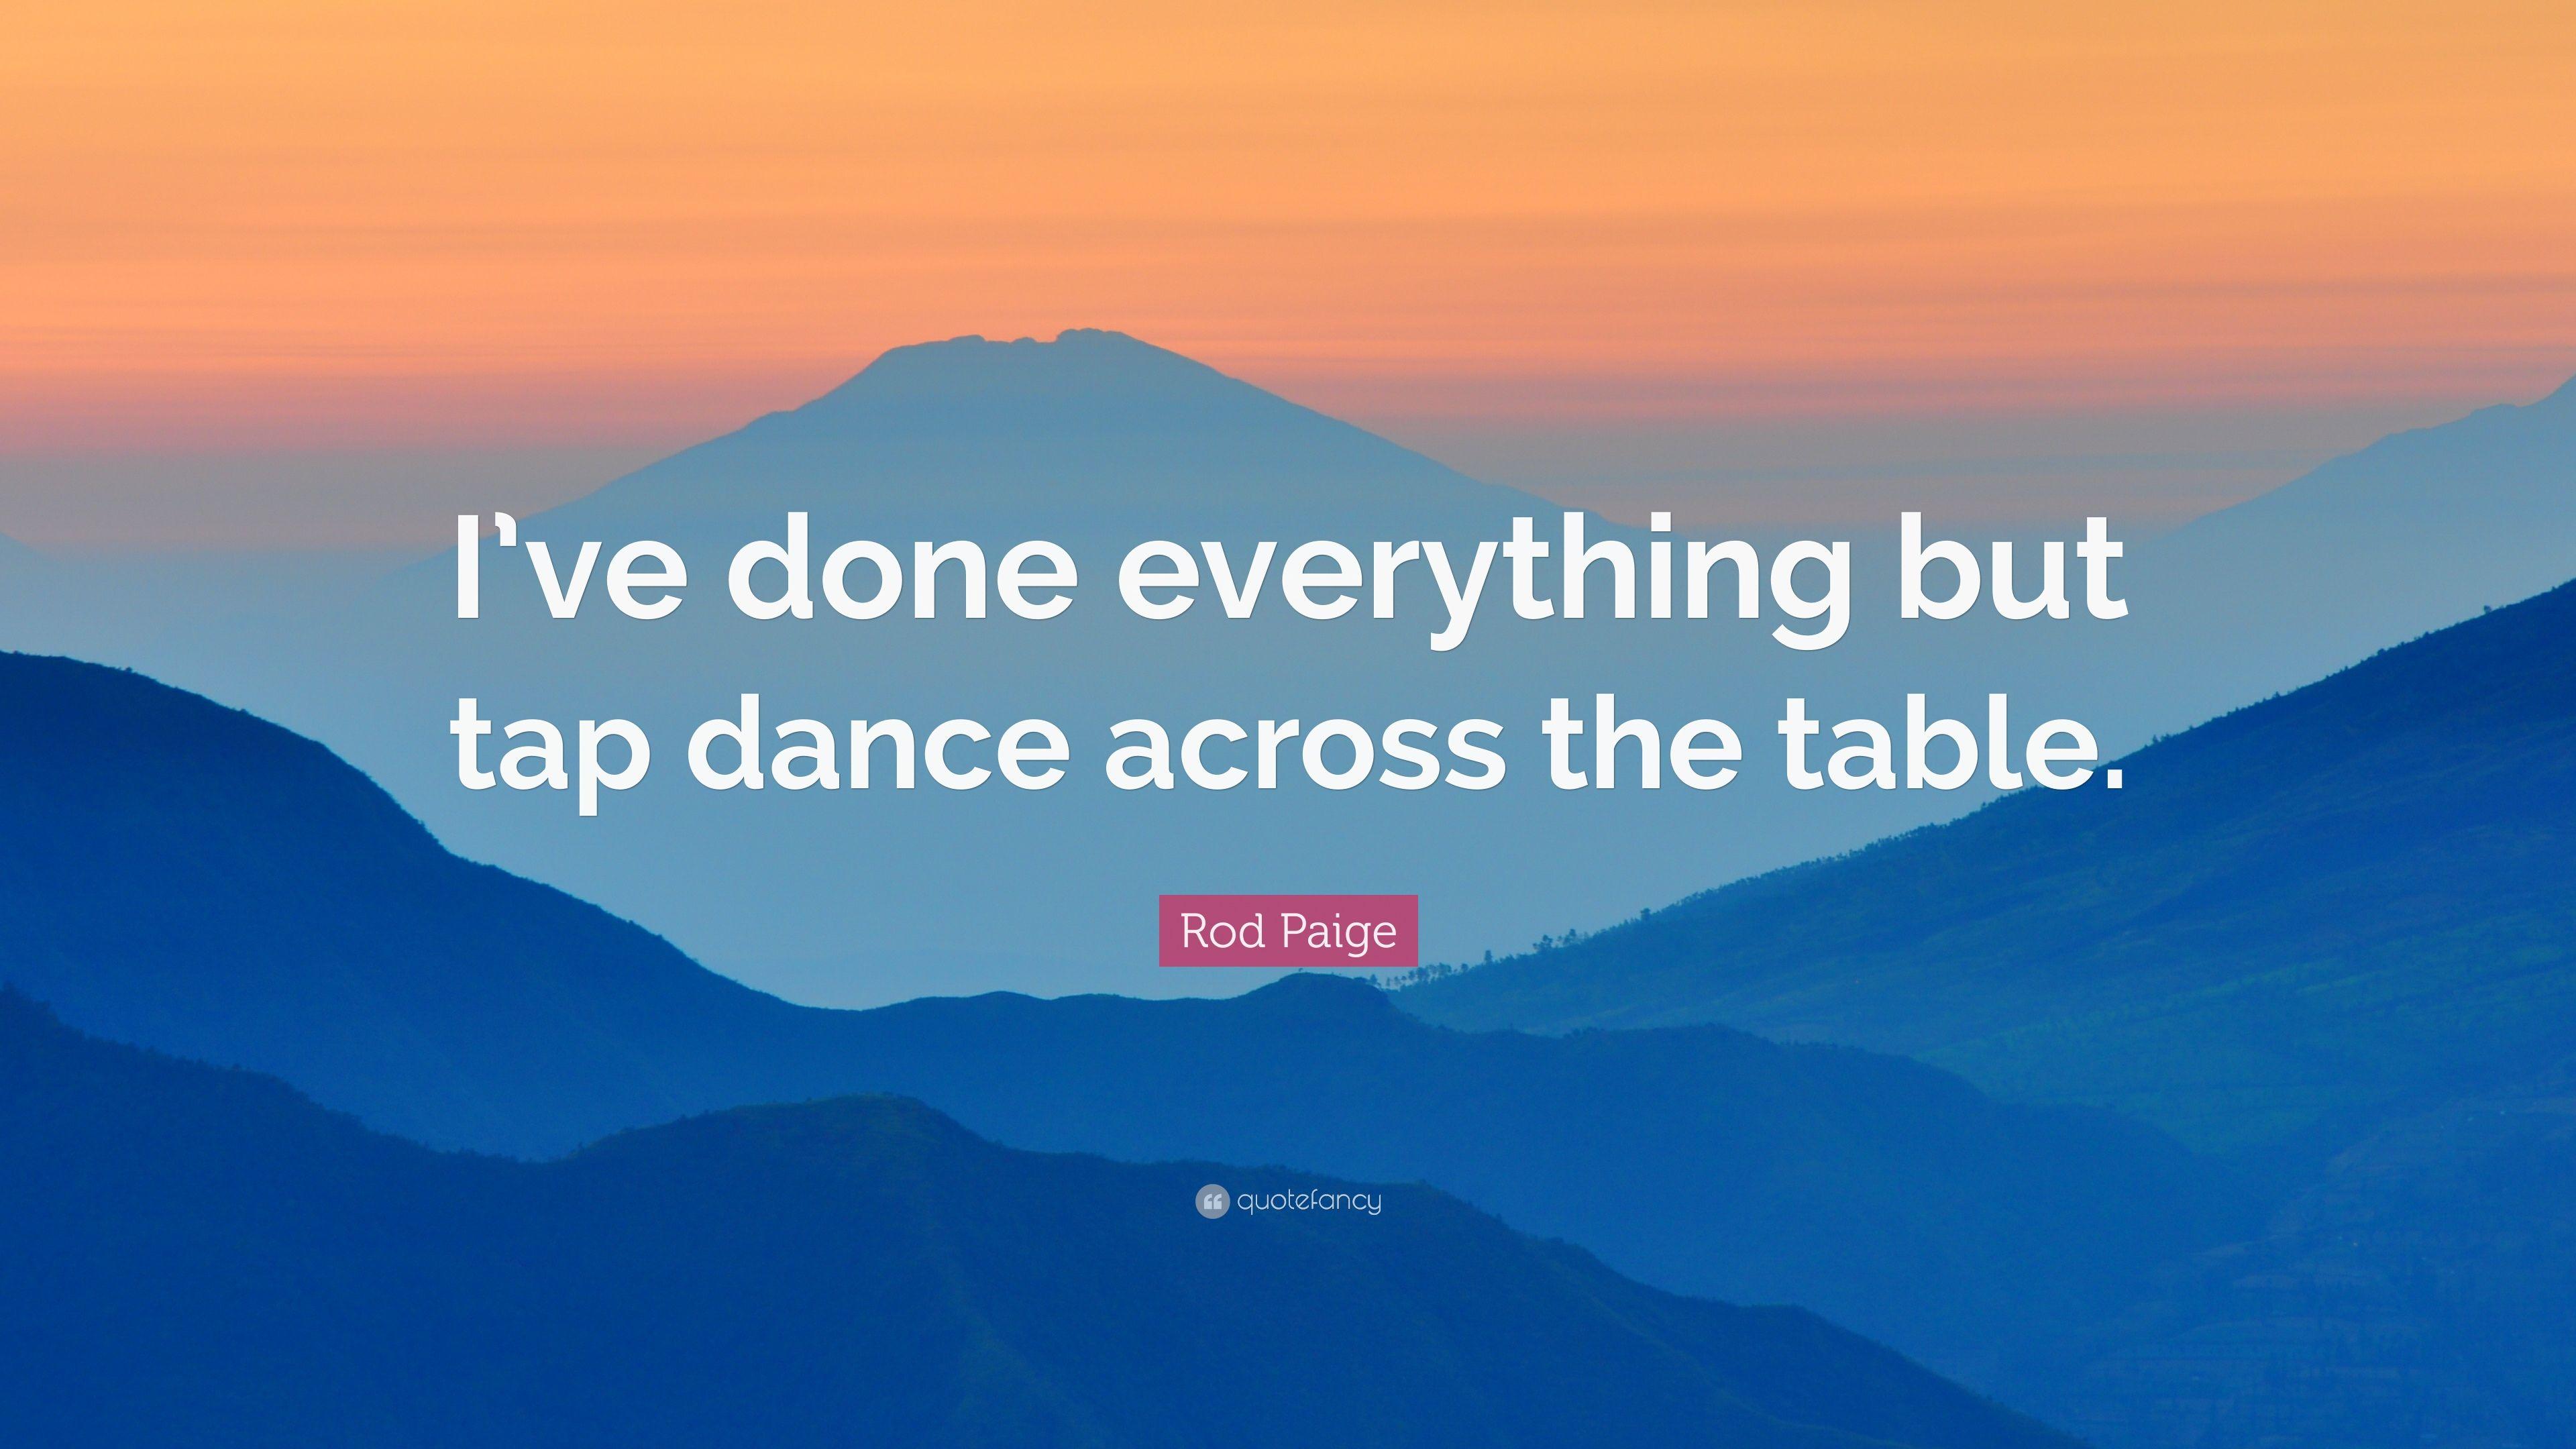 Rod Paige Quote: “I've done everything but tap dance across